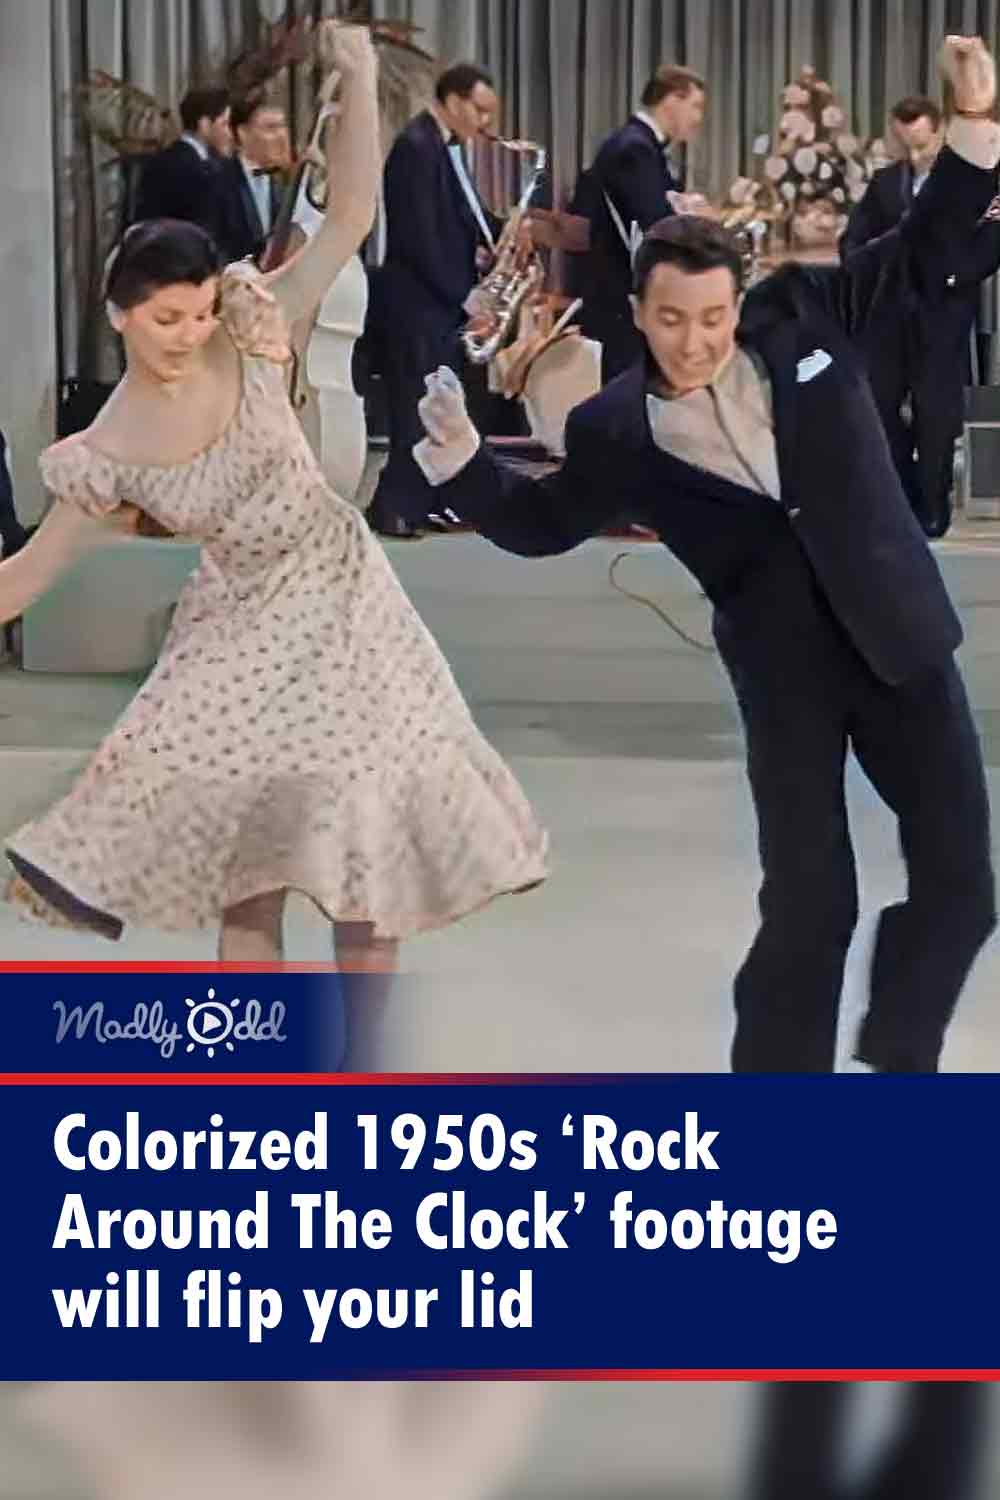 Colorized 1950s ‘Rock Around The Clock’ footage will flip your lid